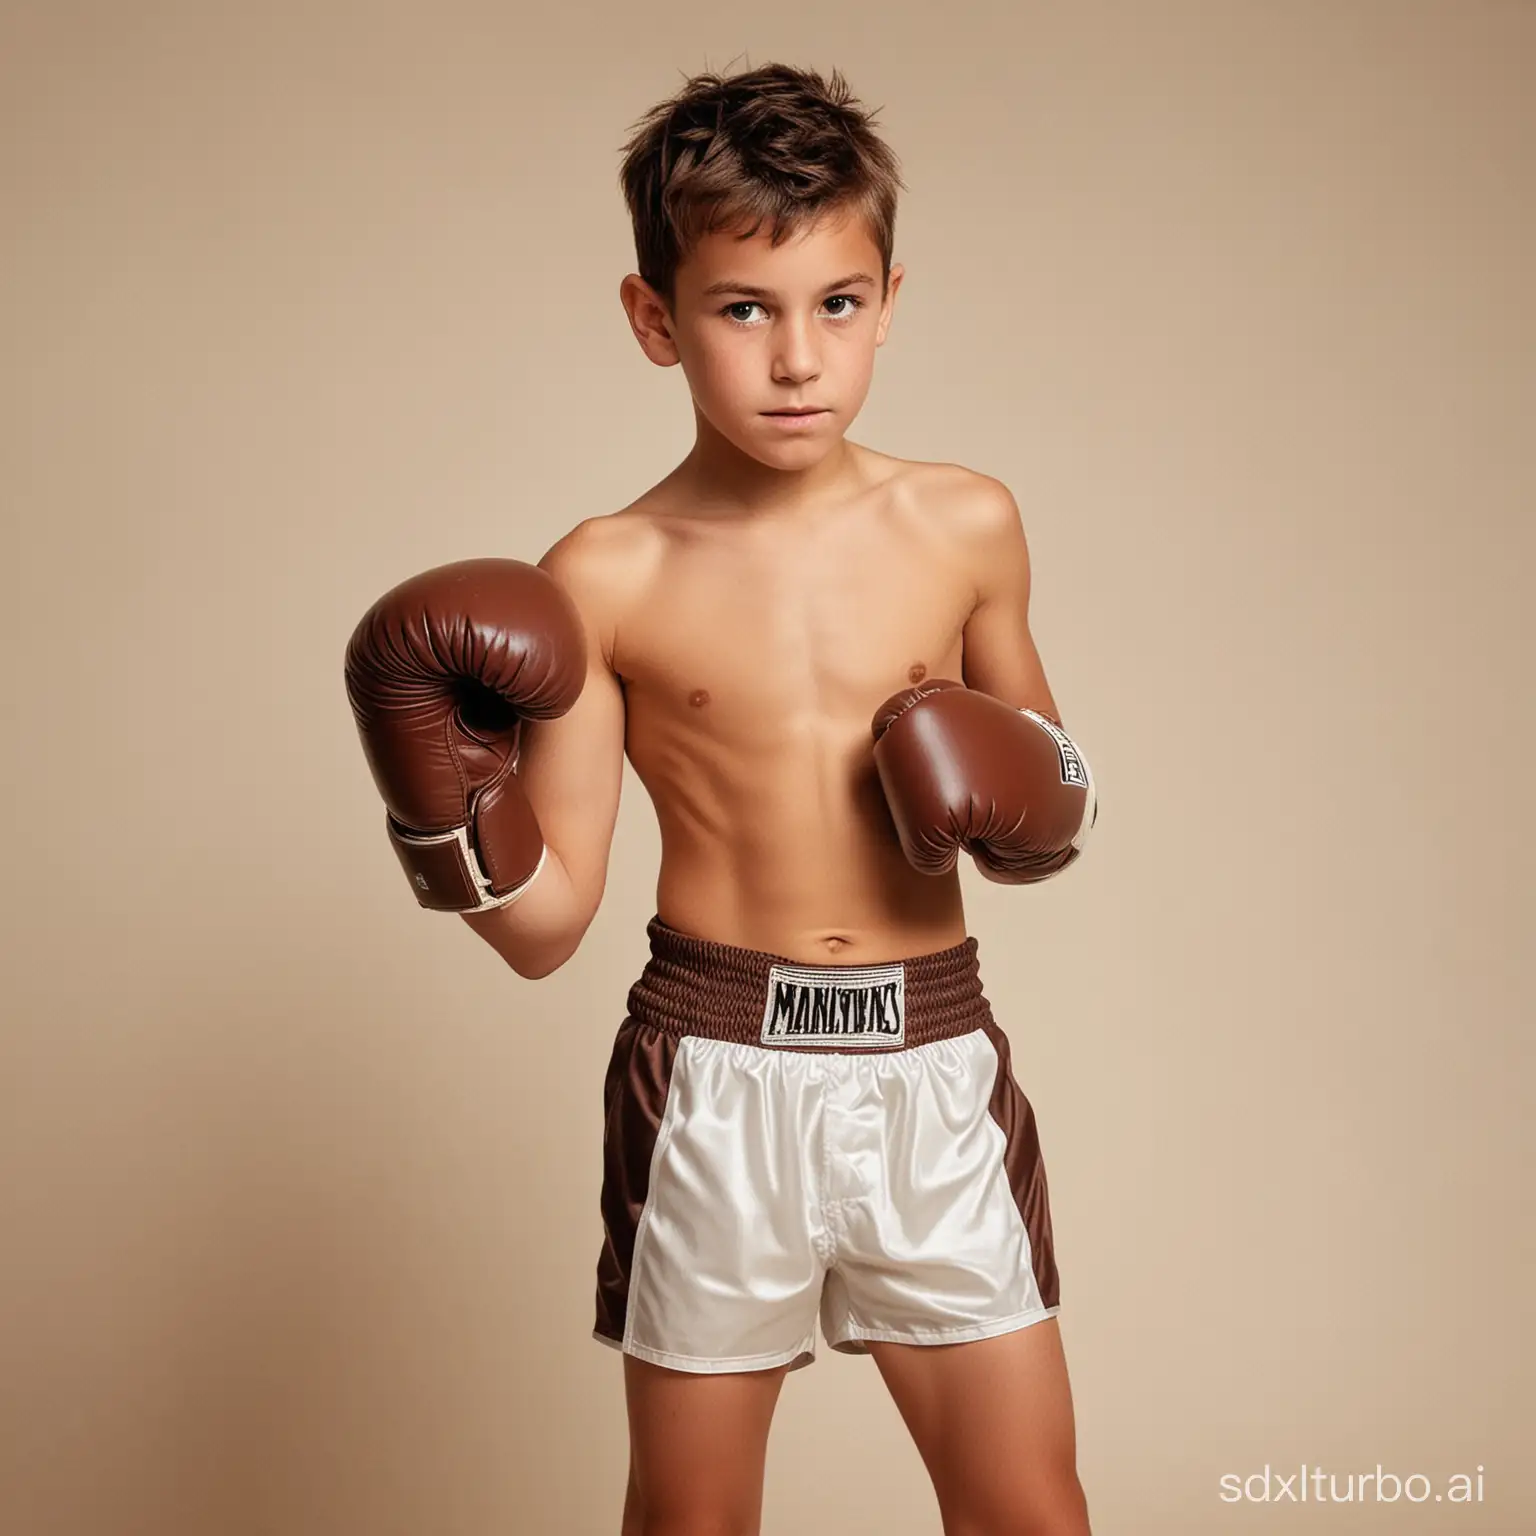 young shirtless boy wearing white boxing trunks and large brown boxing gloves